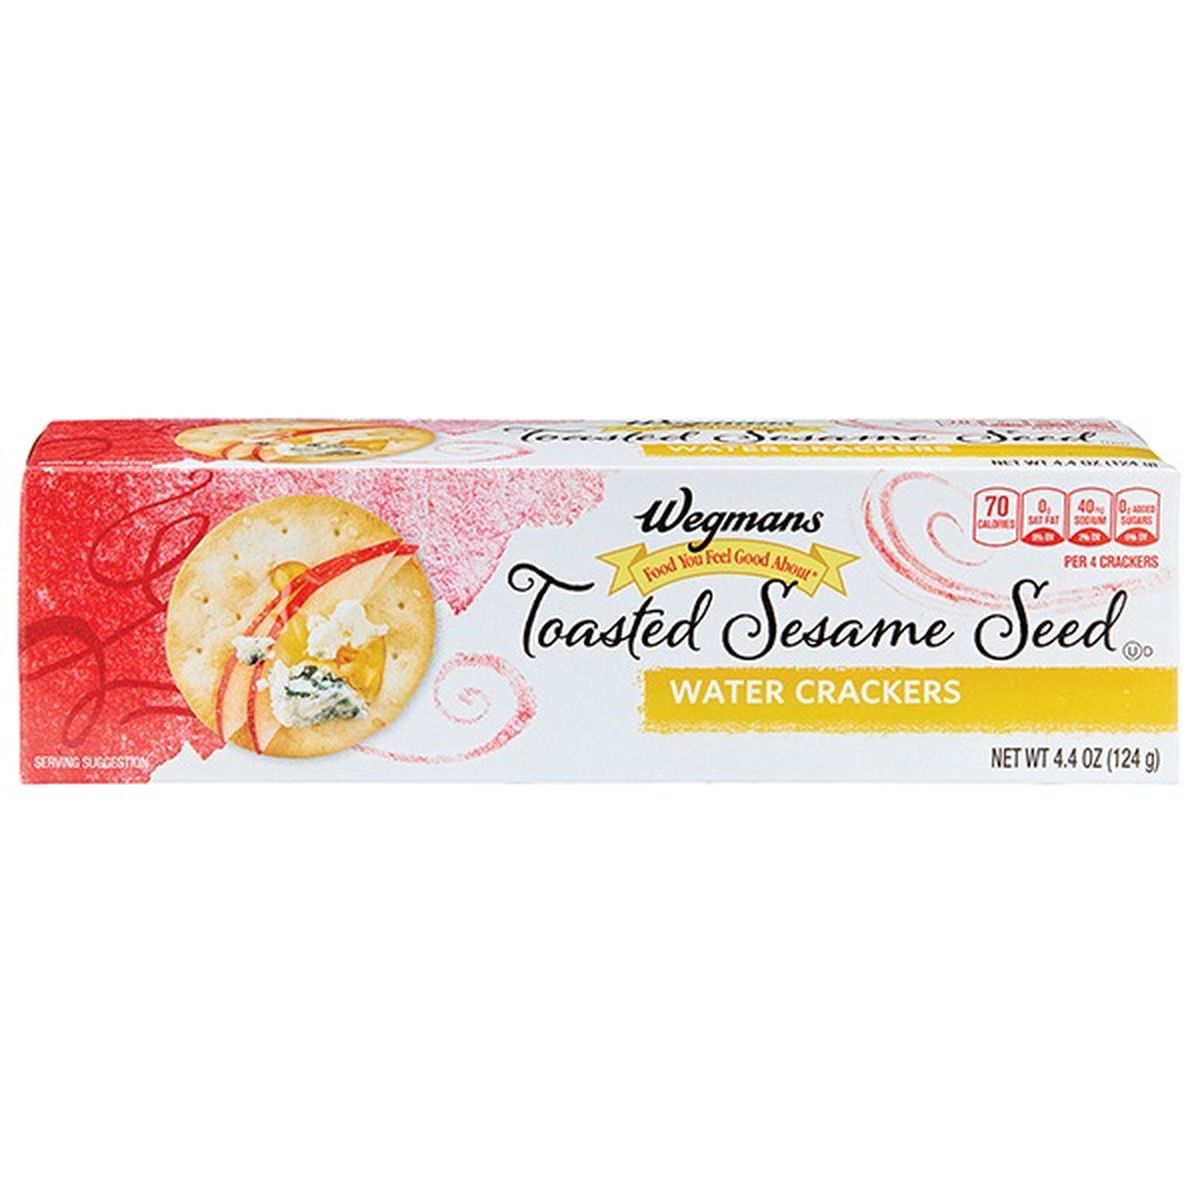 Calories in Wegmans Toasted Sesame Seed Water Crackers